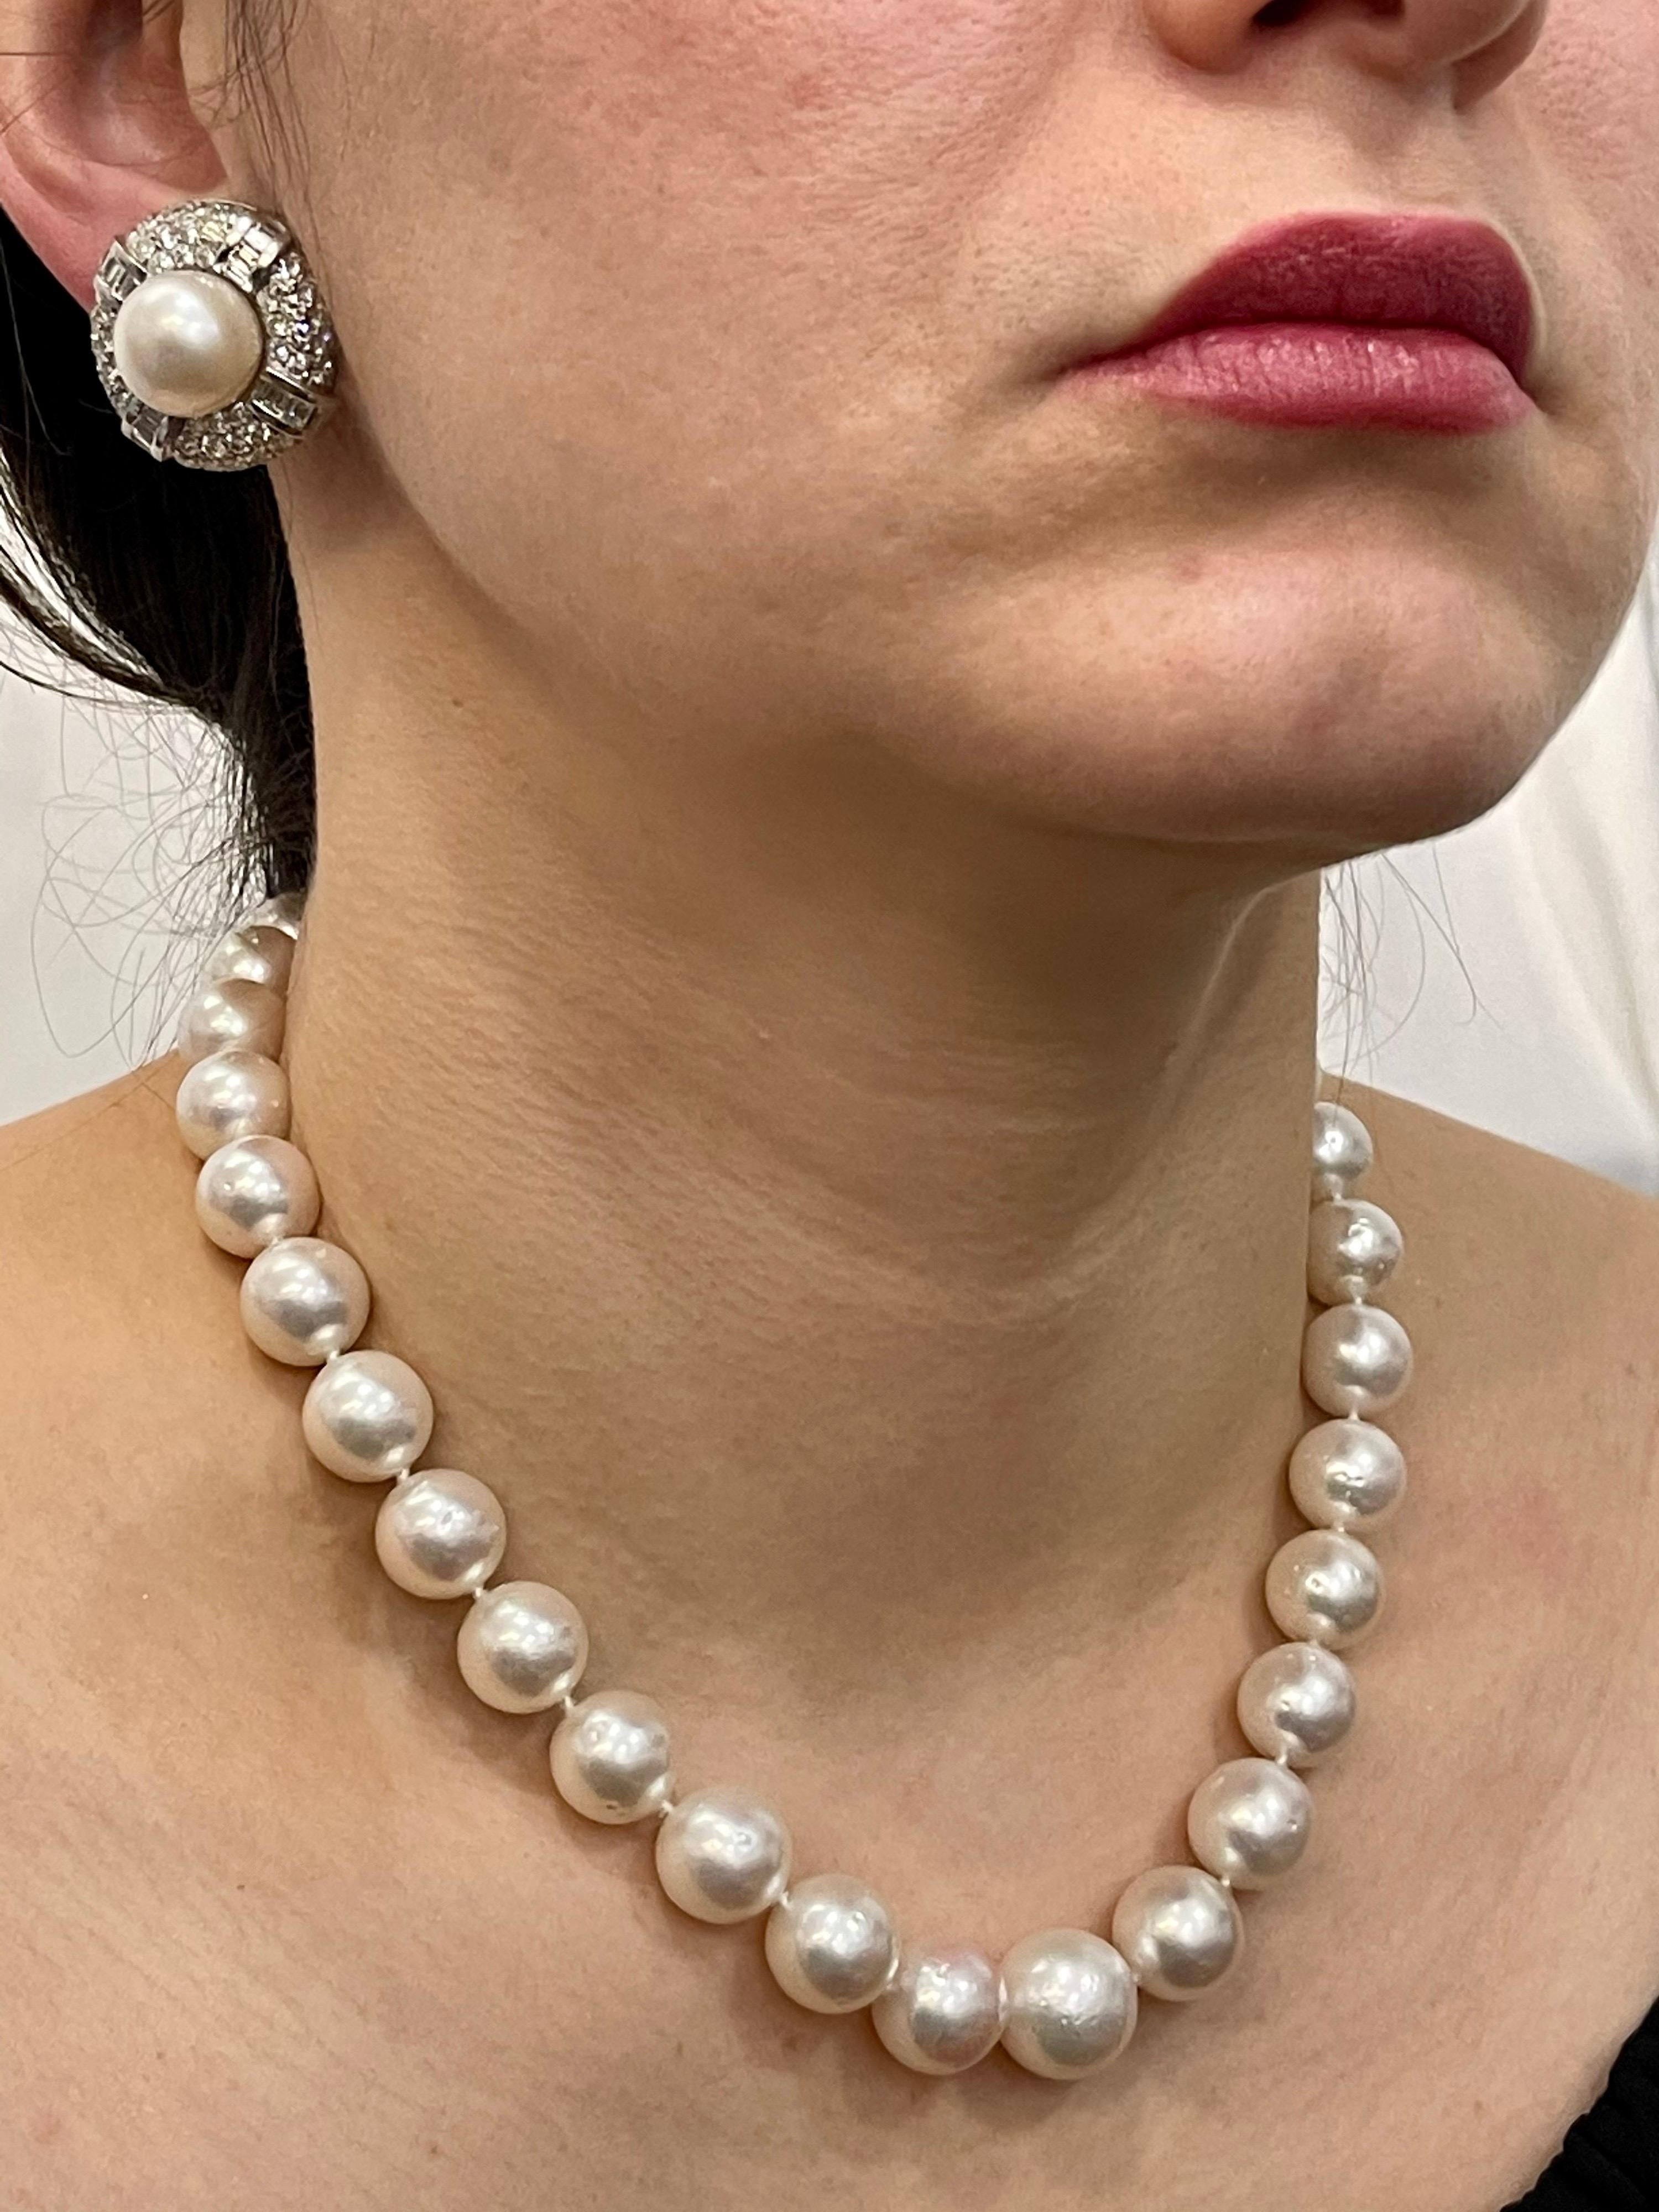 White South Sea Pearls Long Strand Necklace 14 Karat Gold Clasp For Sale 4